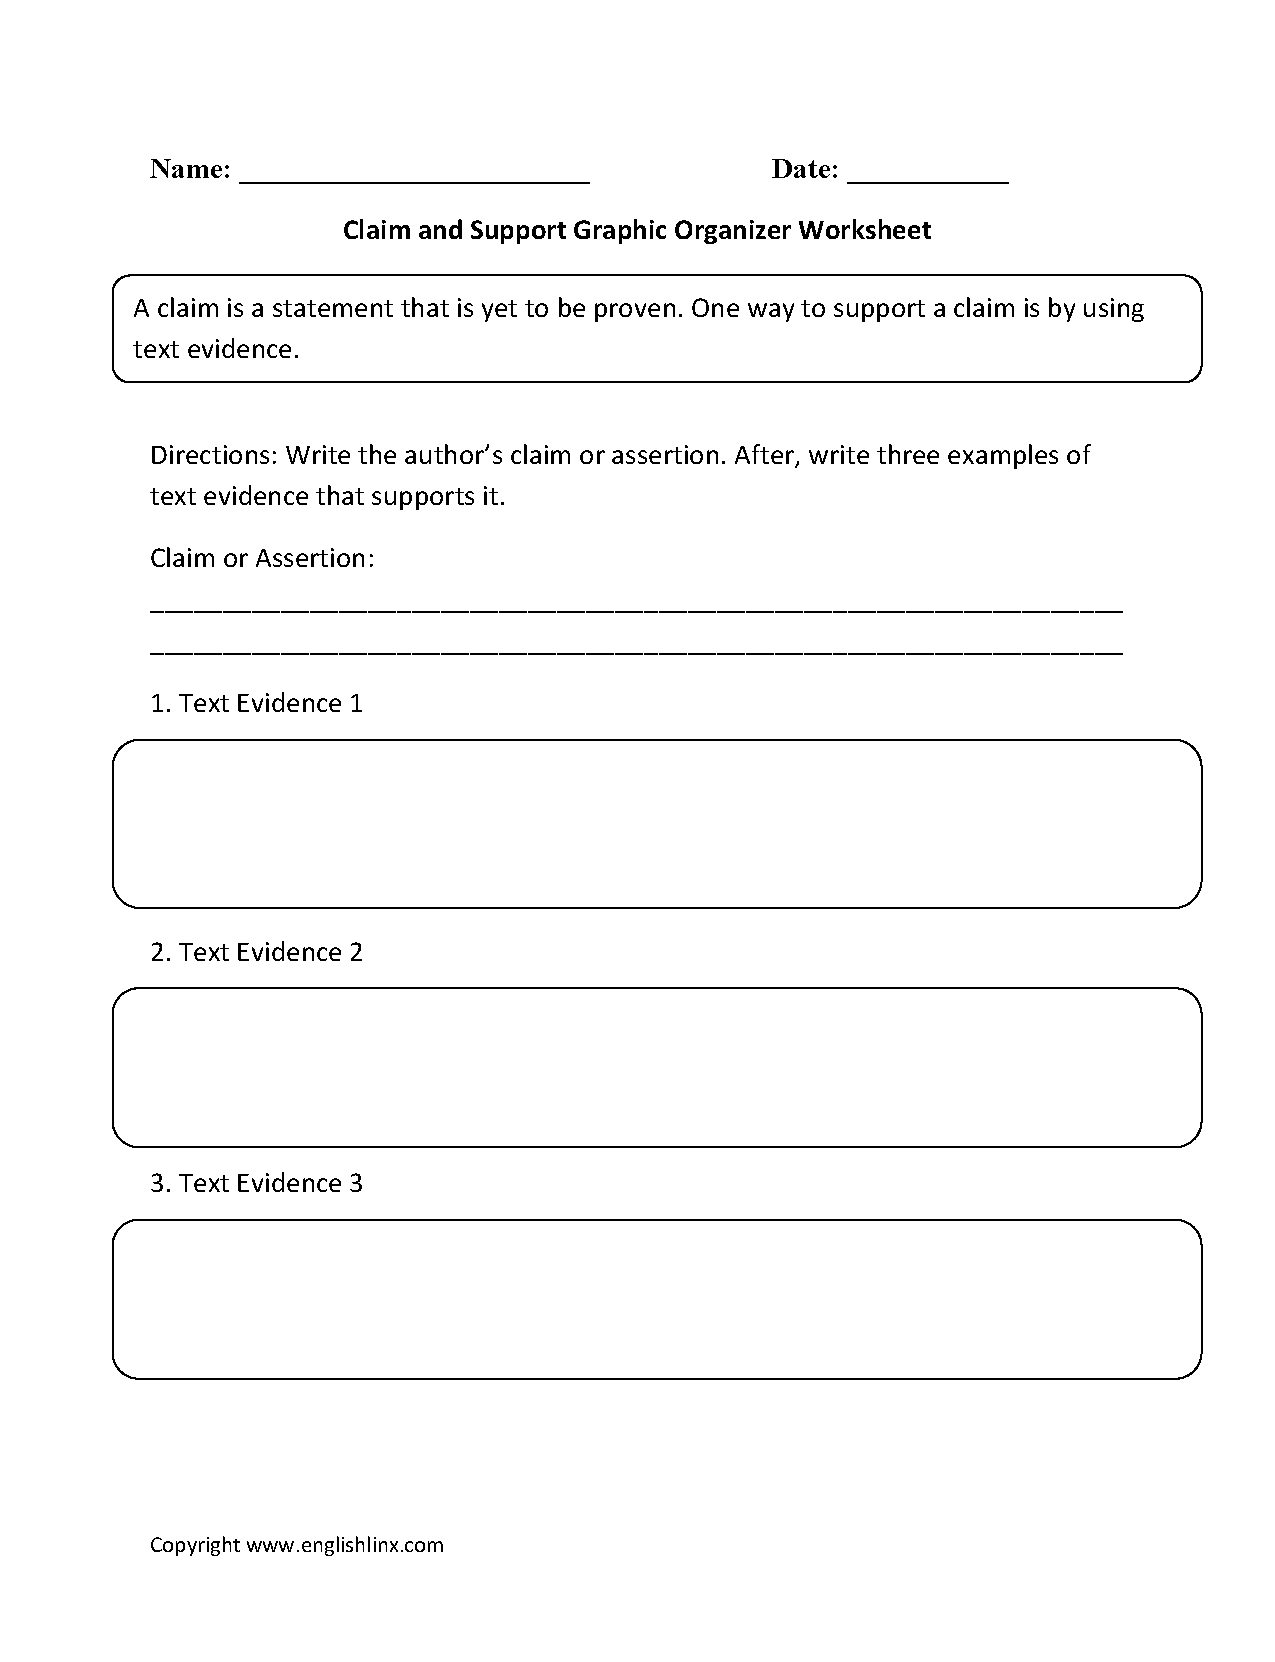 Claim and Support Graphic Organizers Worksheets